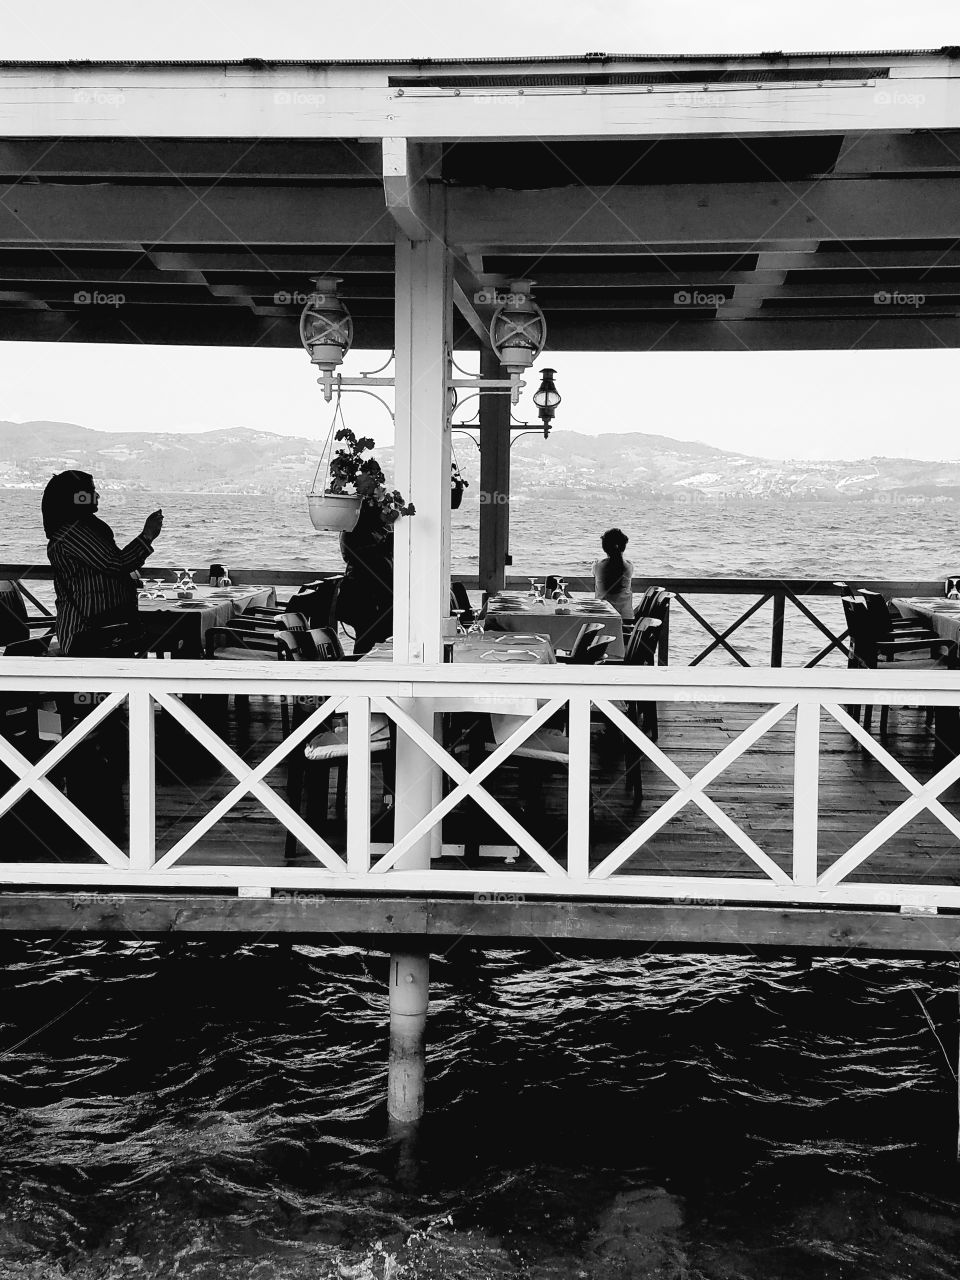 black and white photo of some people on a small restaraunt in the water in Sapanca Turkey